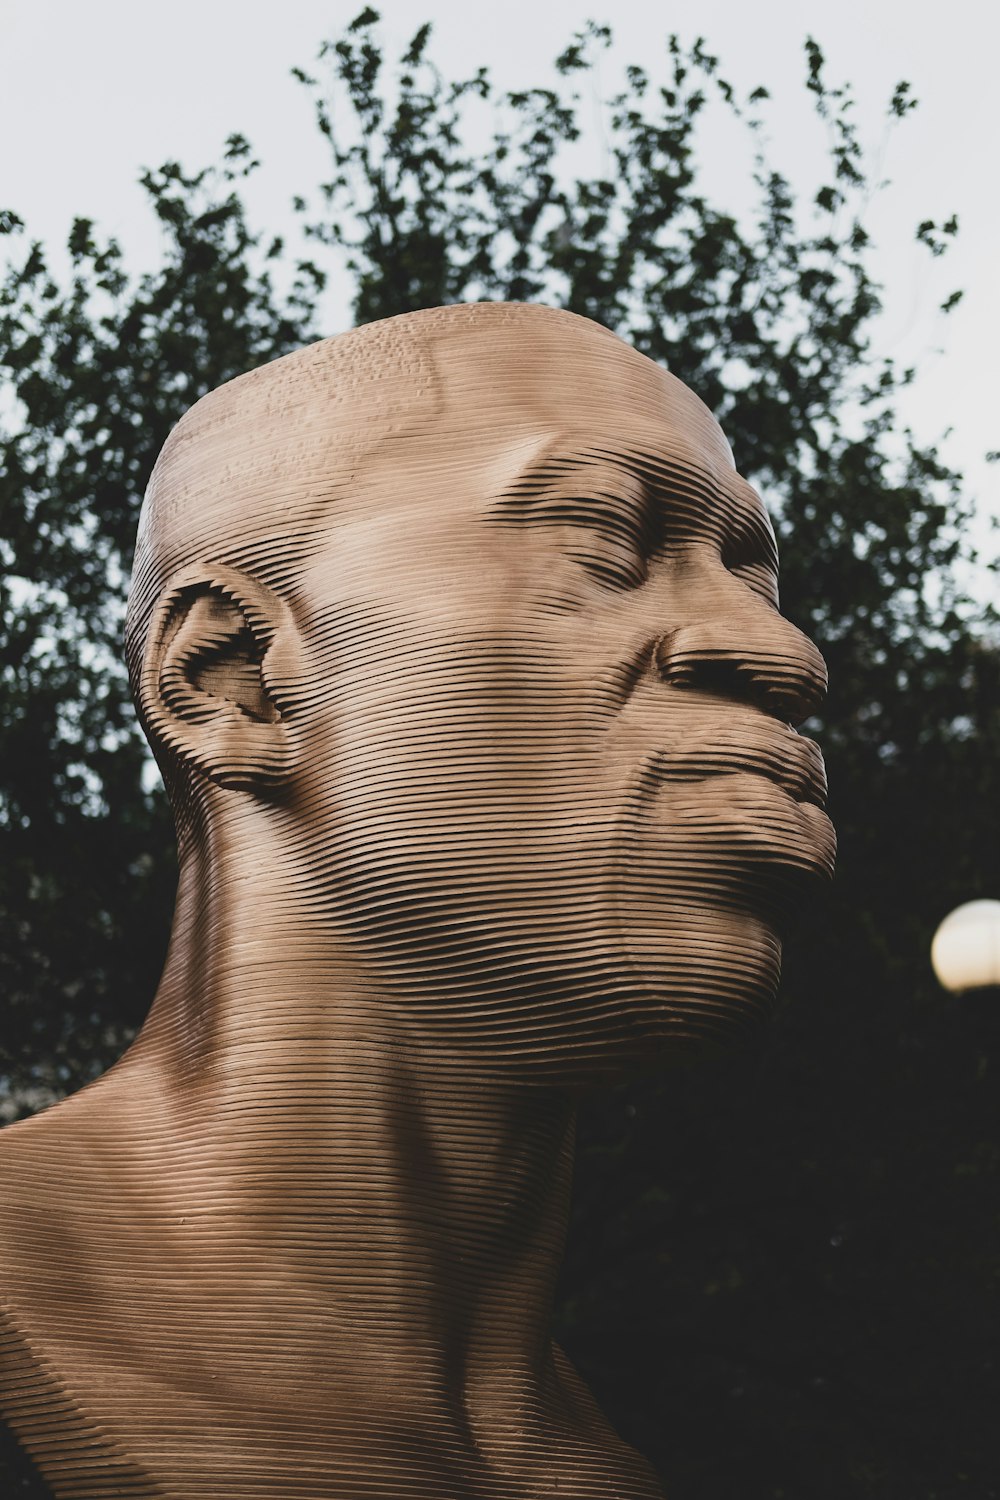 a sculpture of a man's head with trees in the background